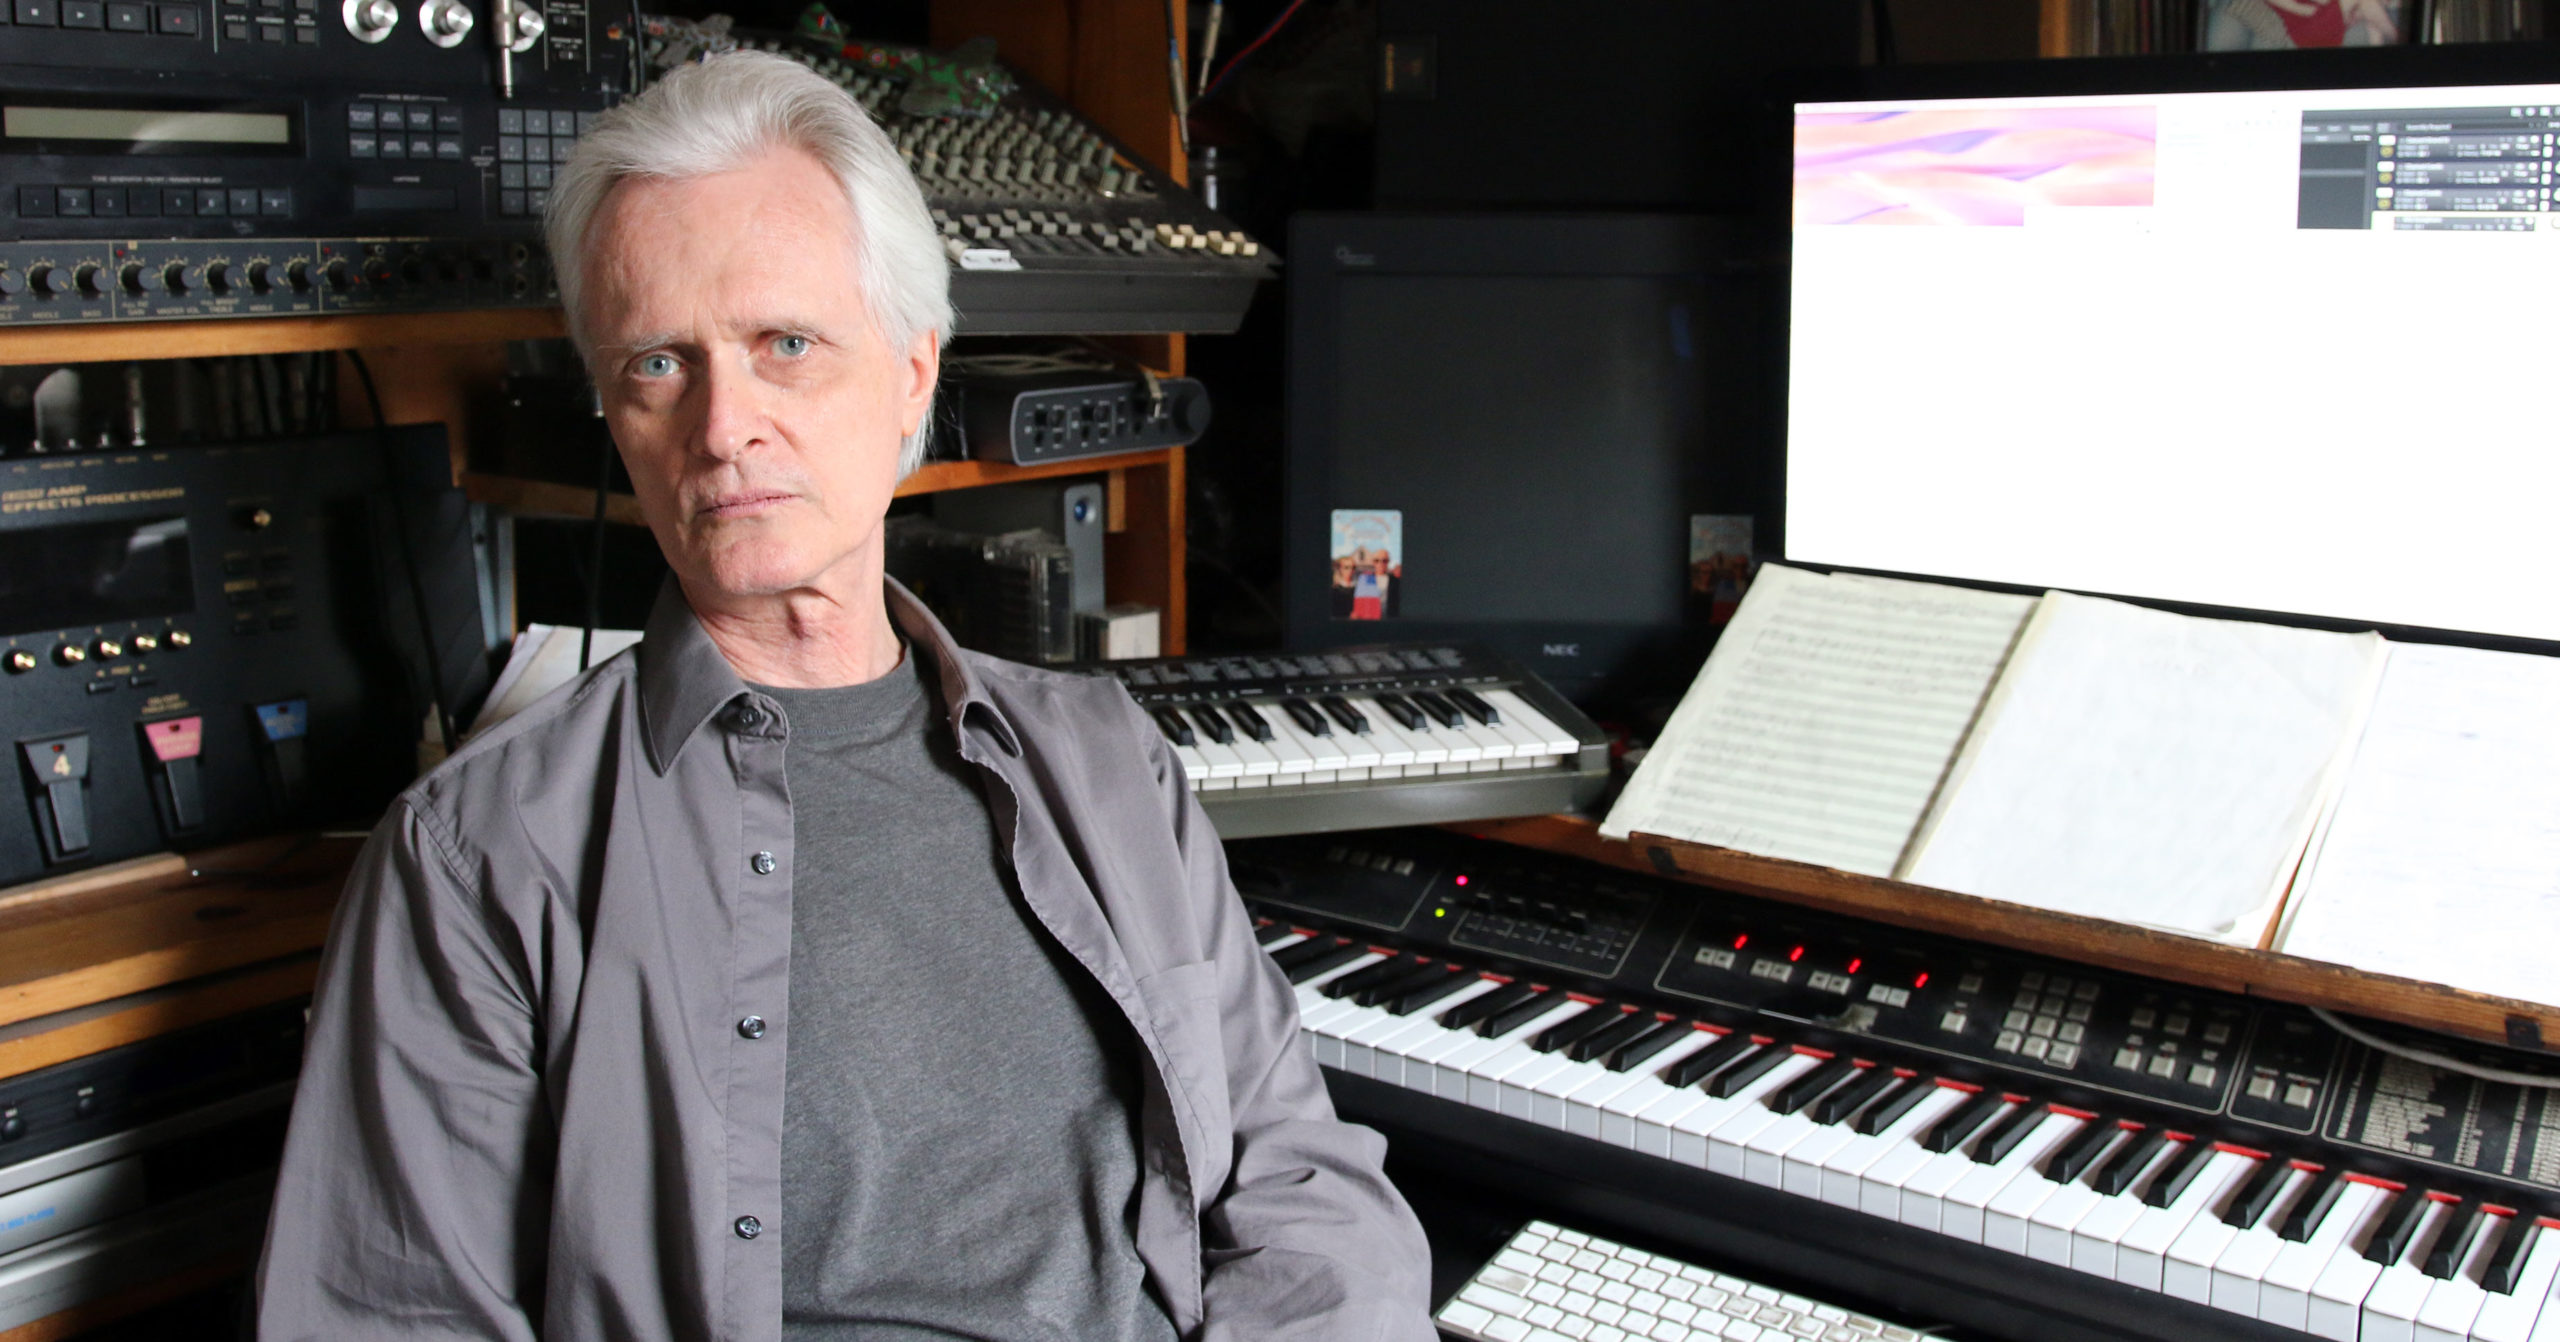 Scott Johnson sitting at his compositional work station surrounded by electric keyboard, mixers, music notation paper, and a large computer screen.